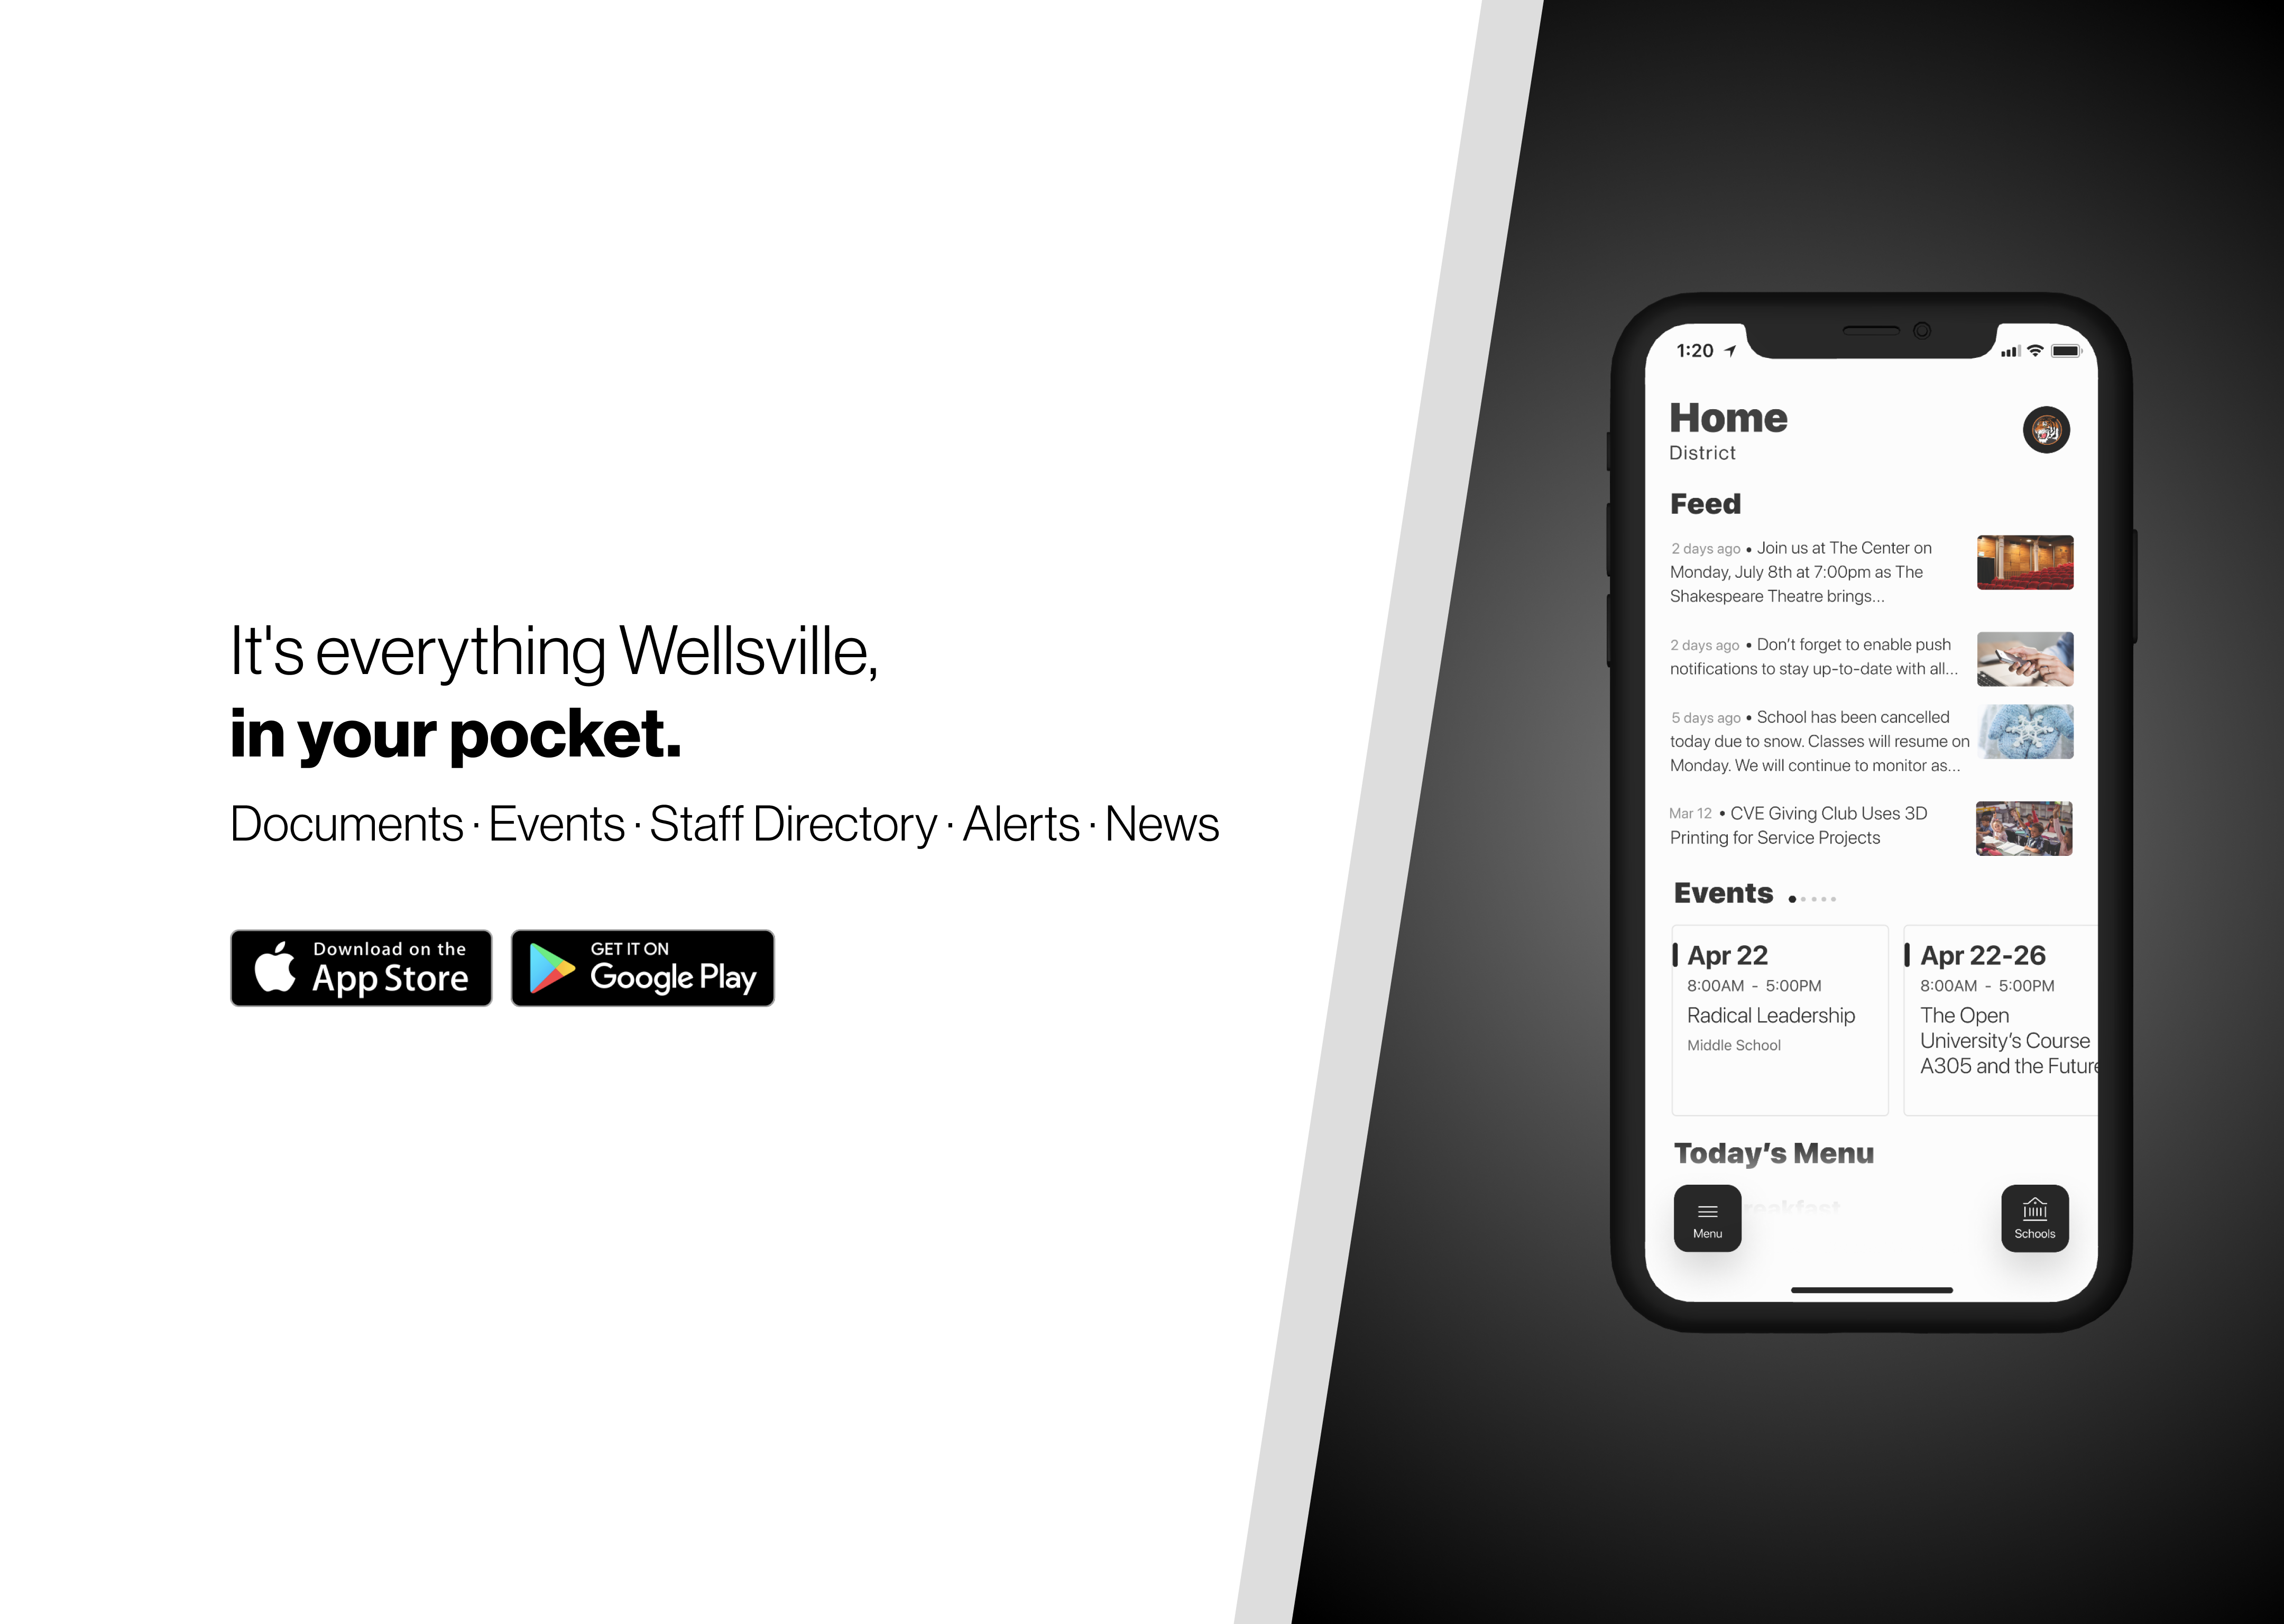 It's everything Wellsville, in your pocket. Click below to download the new Wellsville App on Google Play and App Stores.